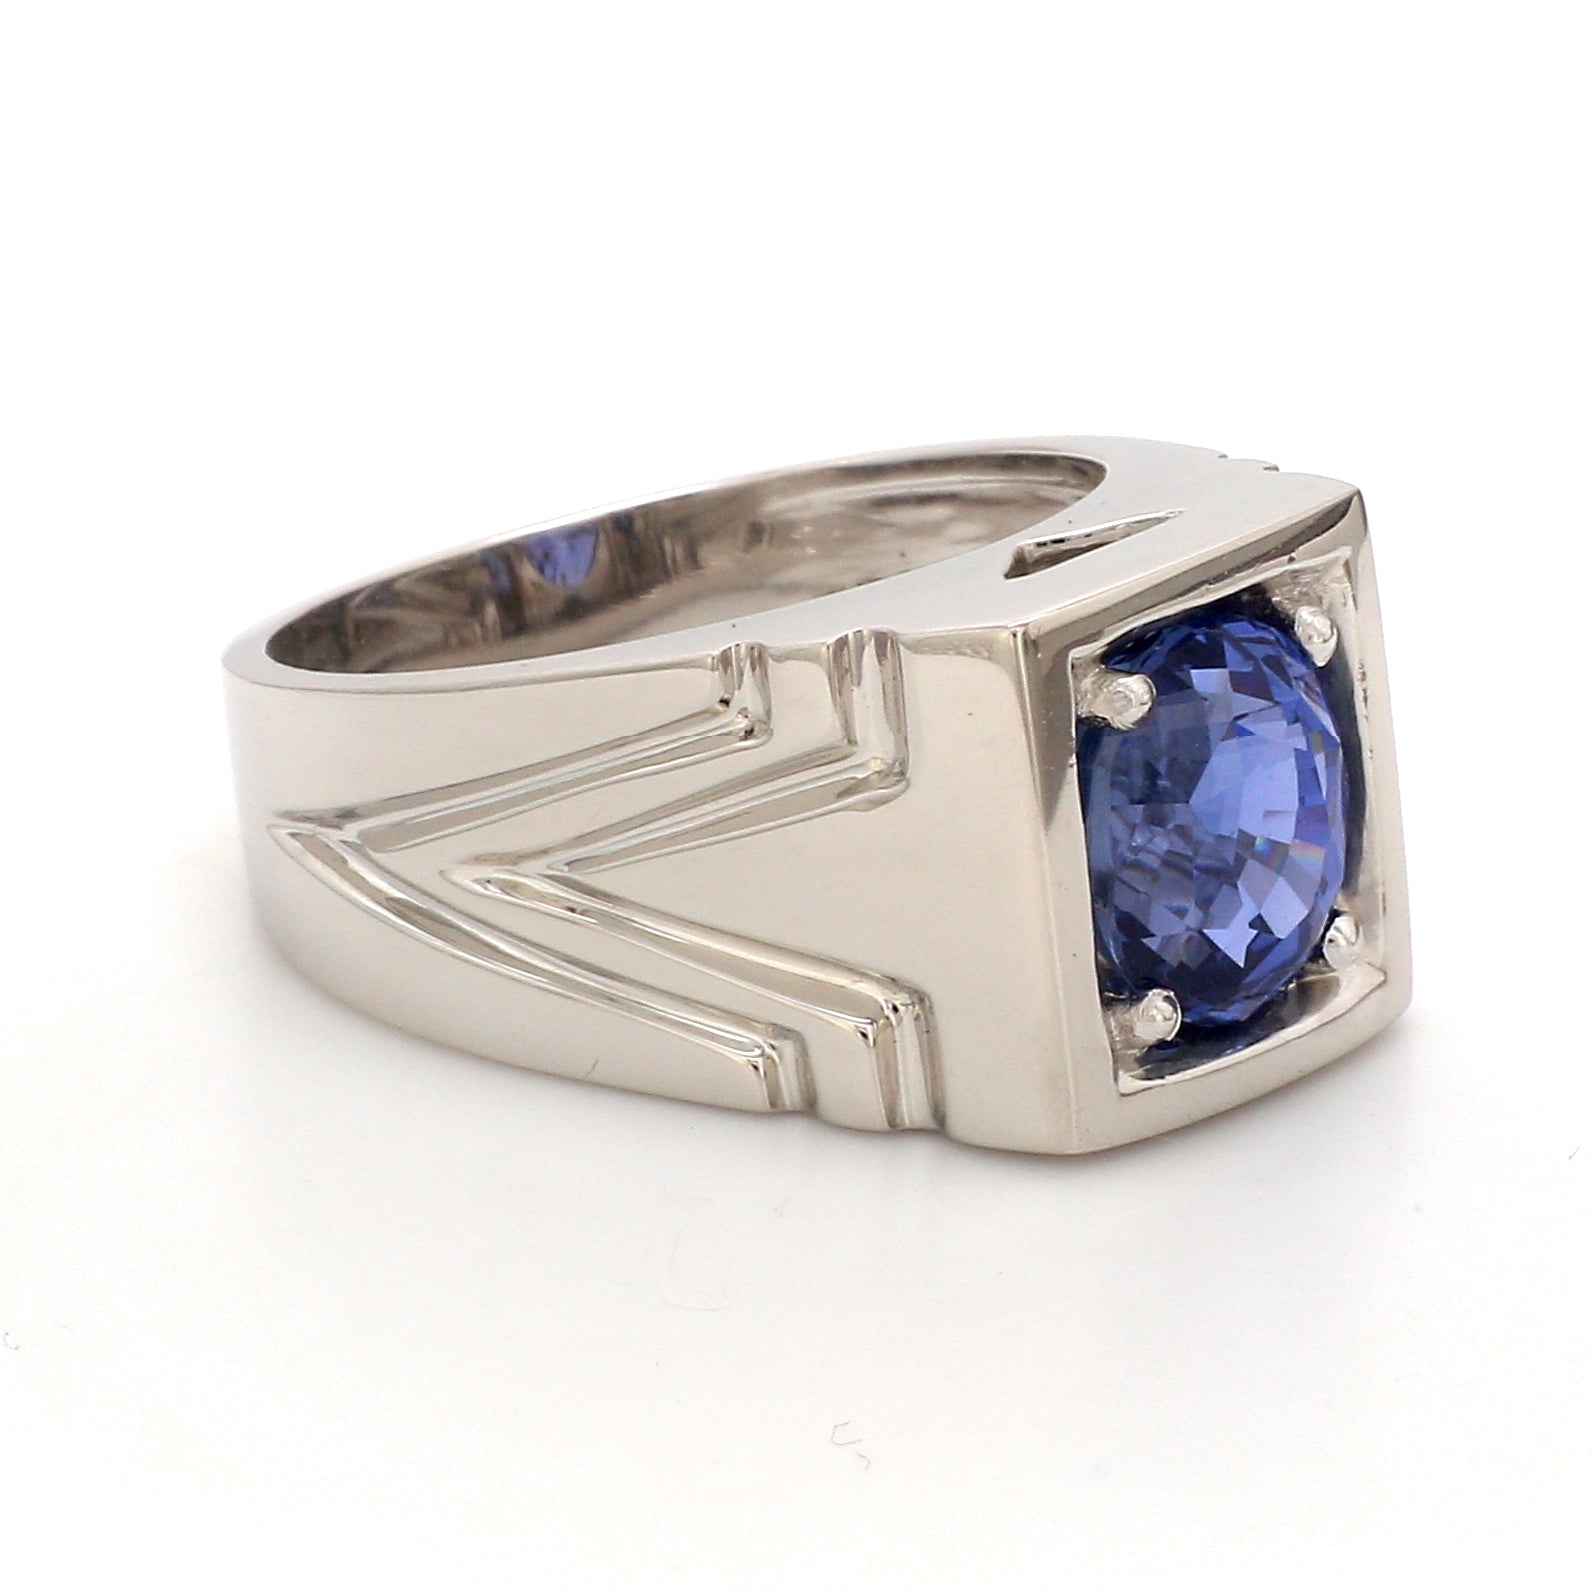 The Dynamic Blue Sapphire Gold Ring